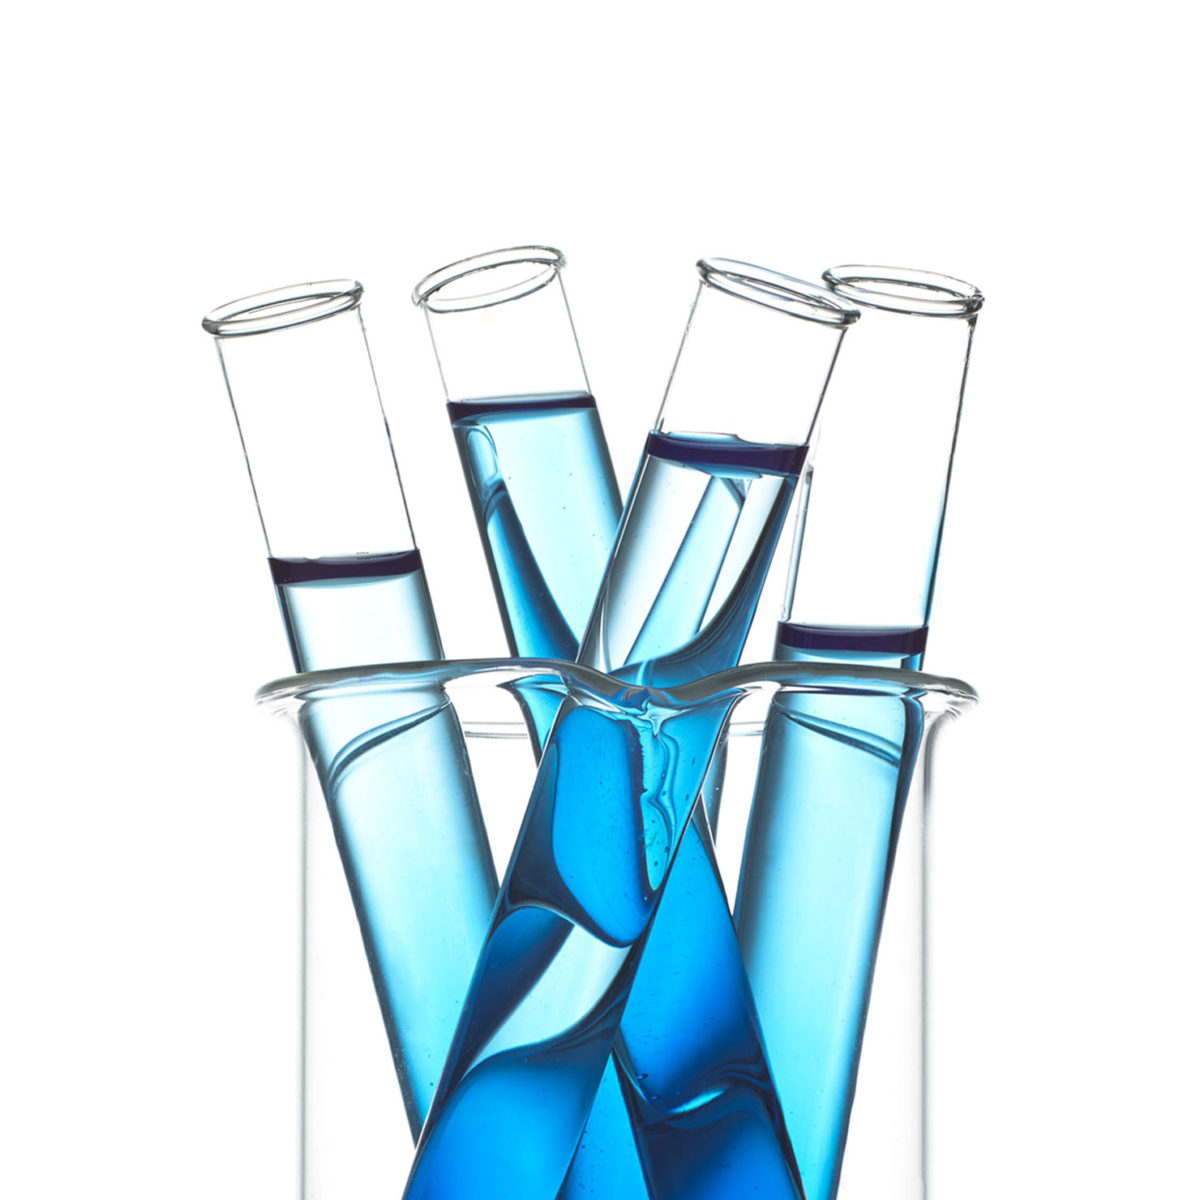 Four test tubes filled with blue liquid.